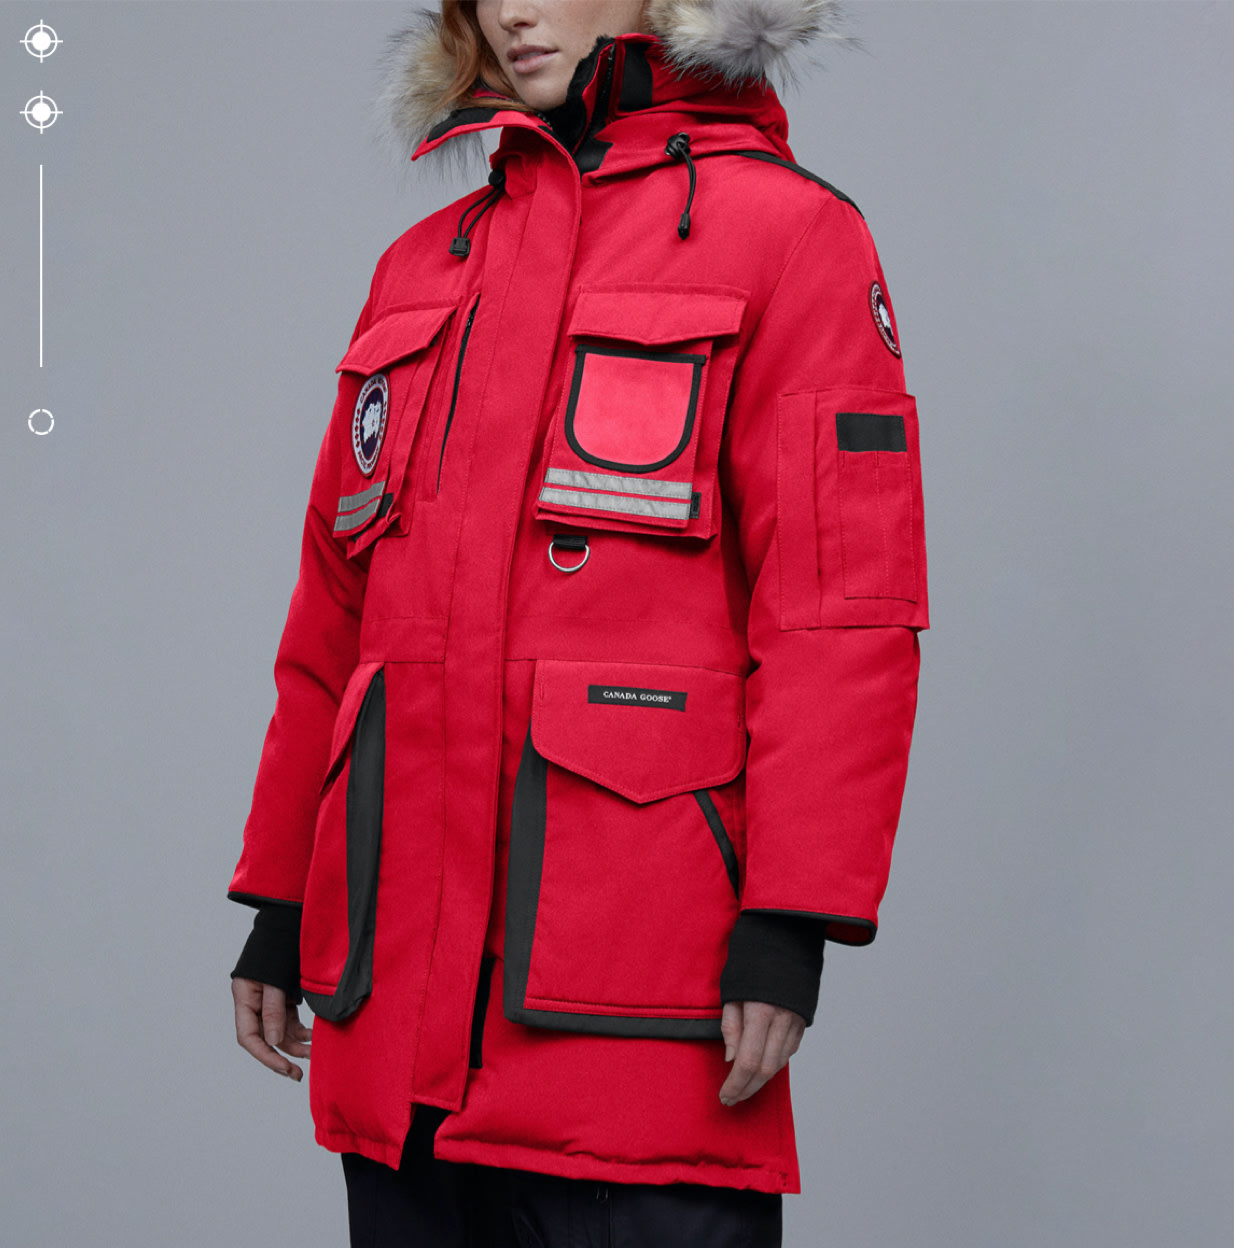 Thermal Experience Index | TEI | Canada Goose